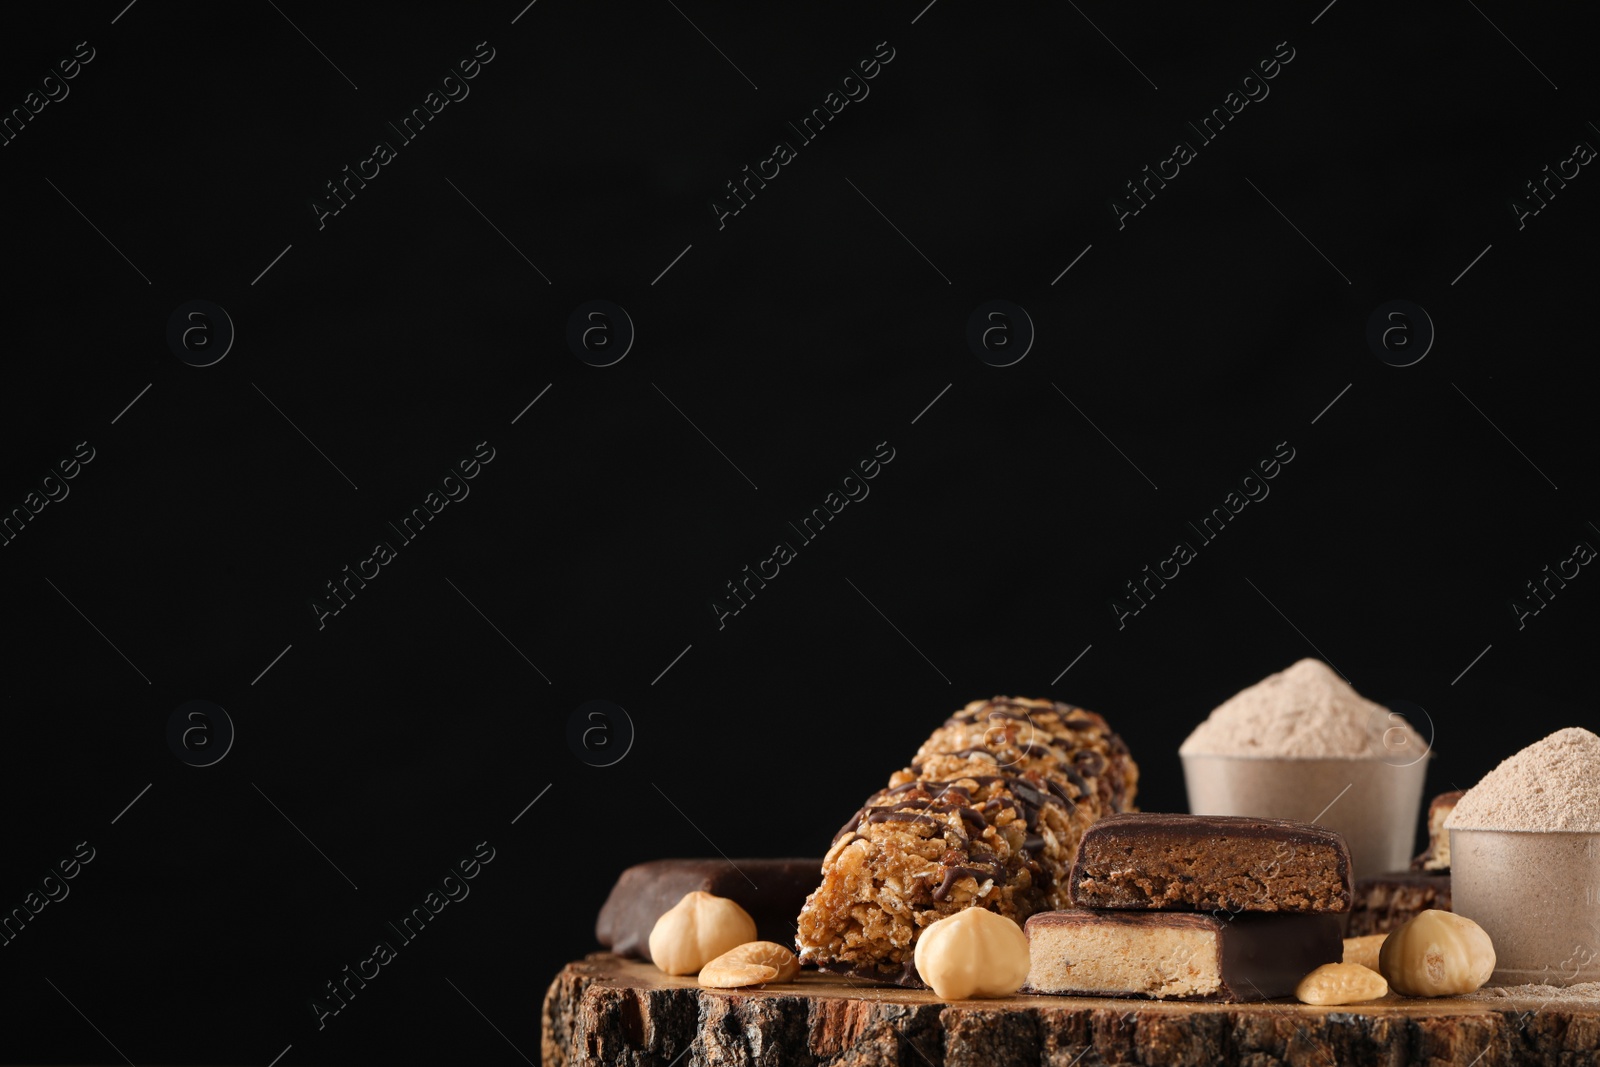 Photo of Different tasty energy bars, nuts and protein powder on wooden stump against black background, space for text